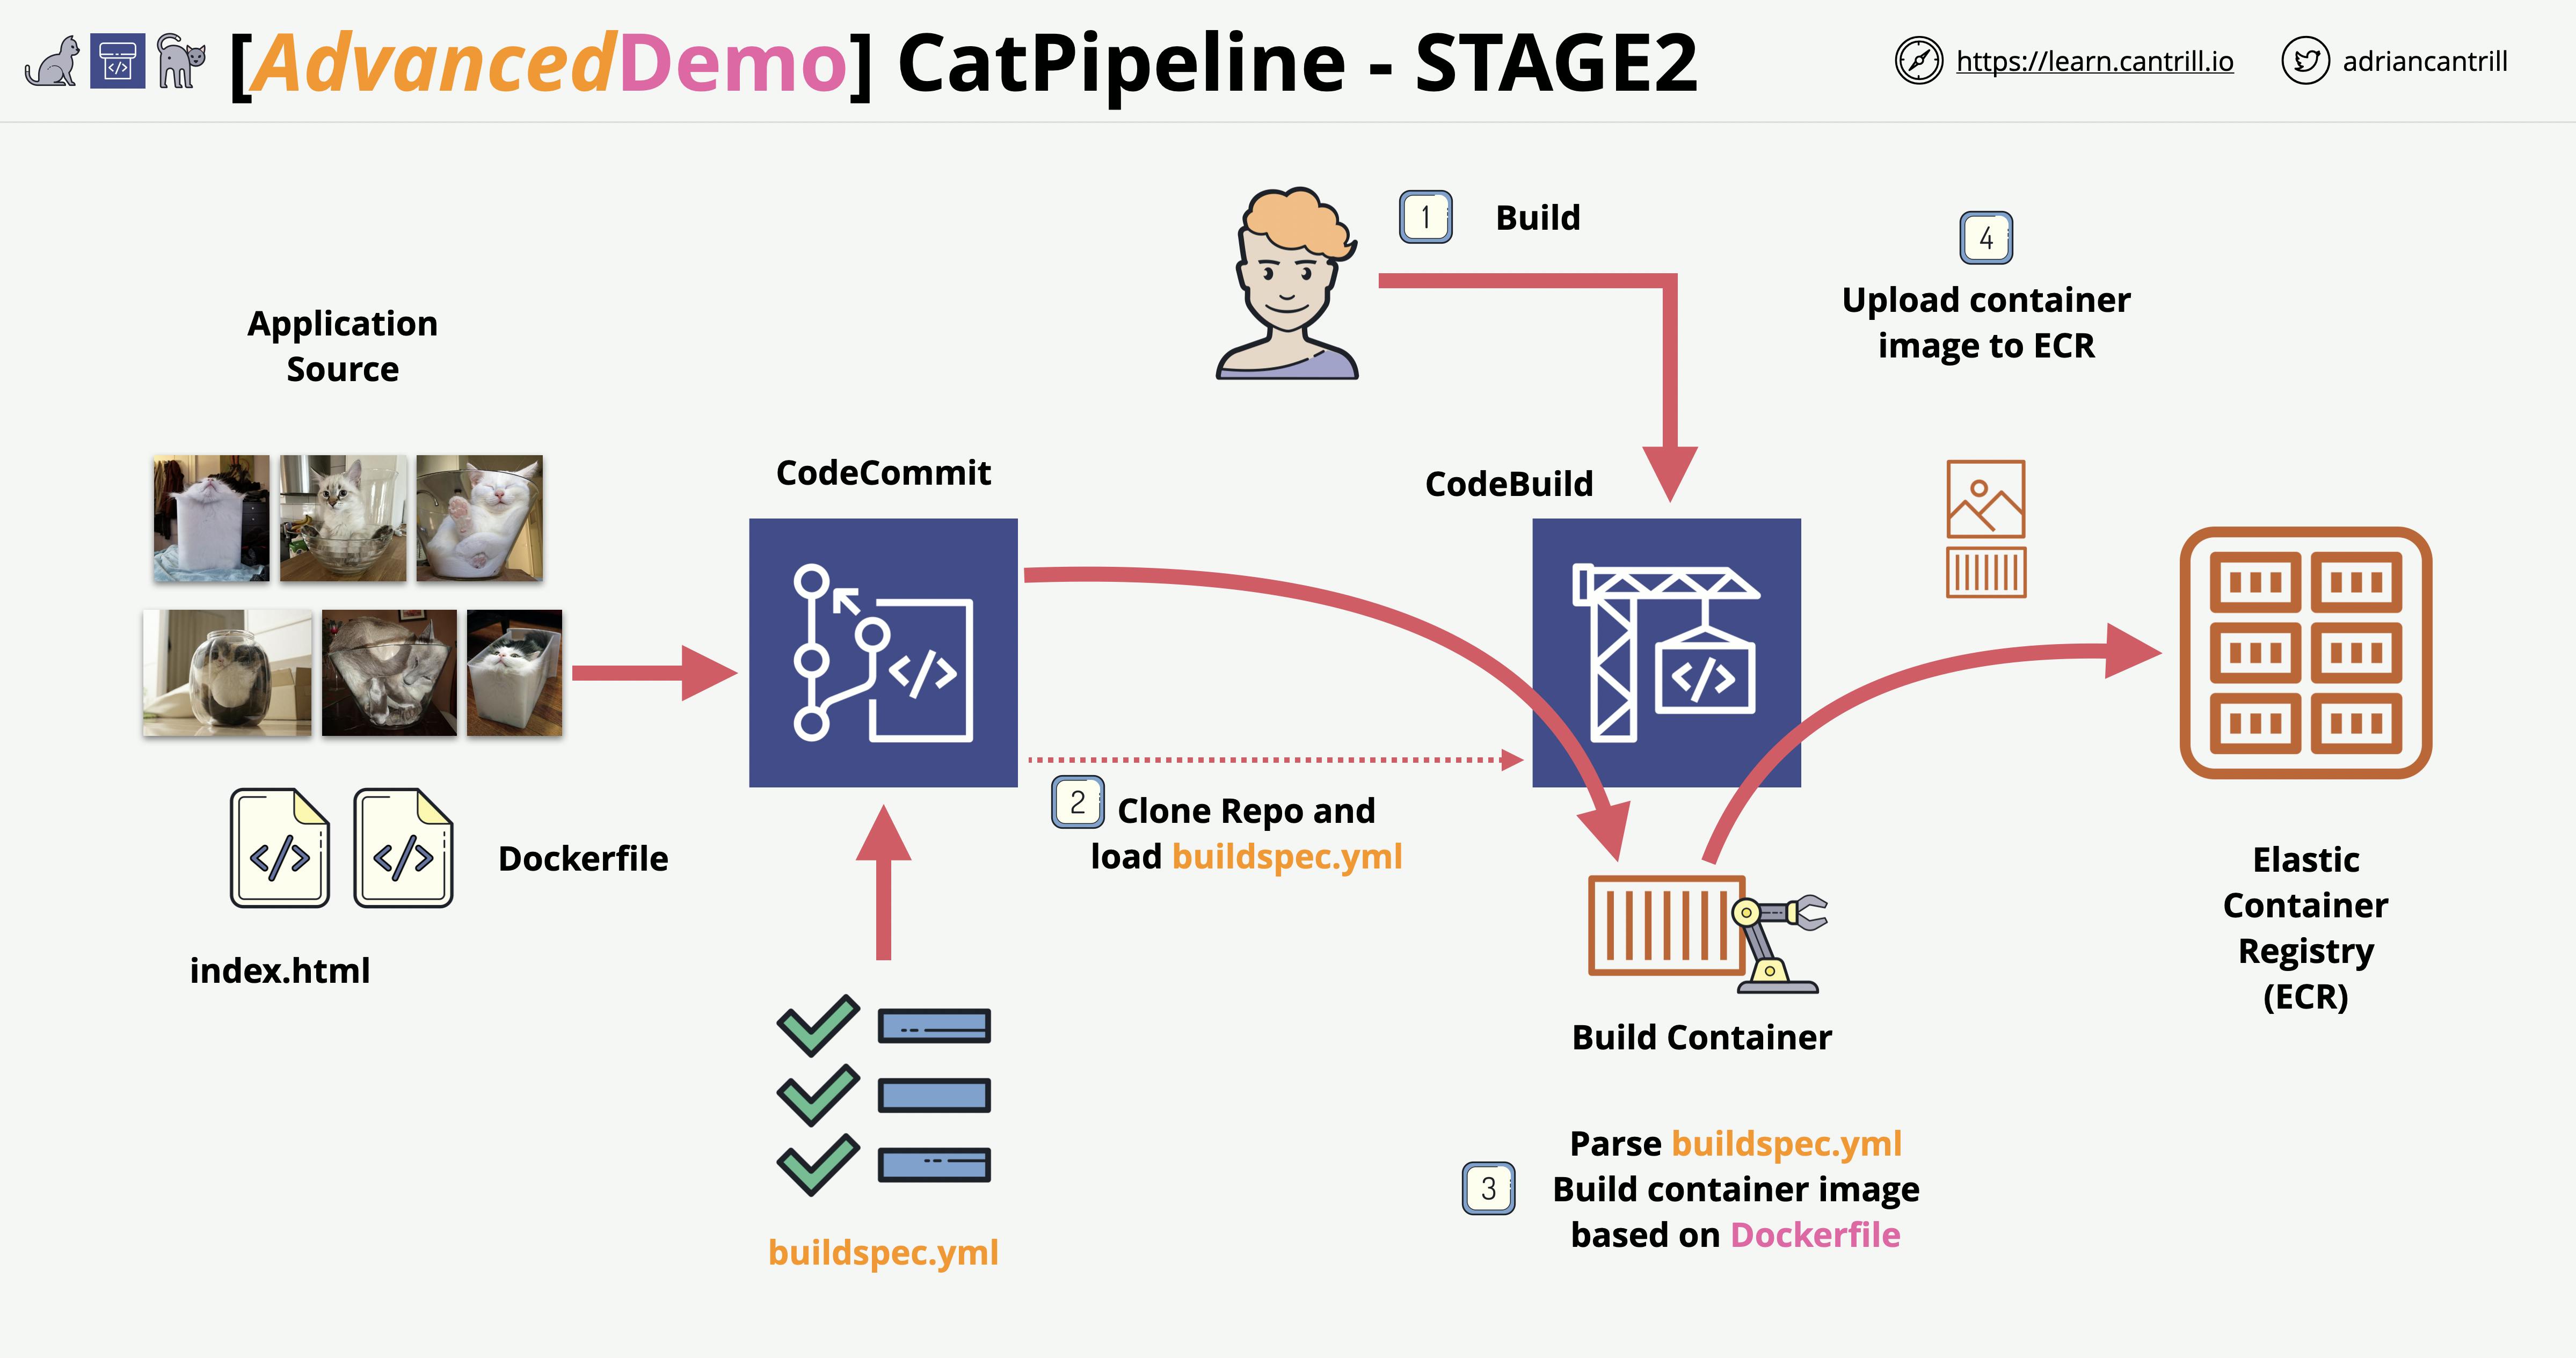 catpipeline-arch-stage2.png